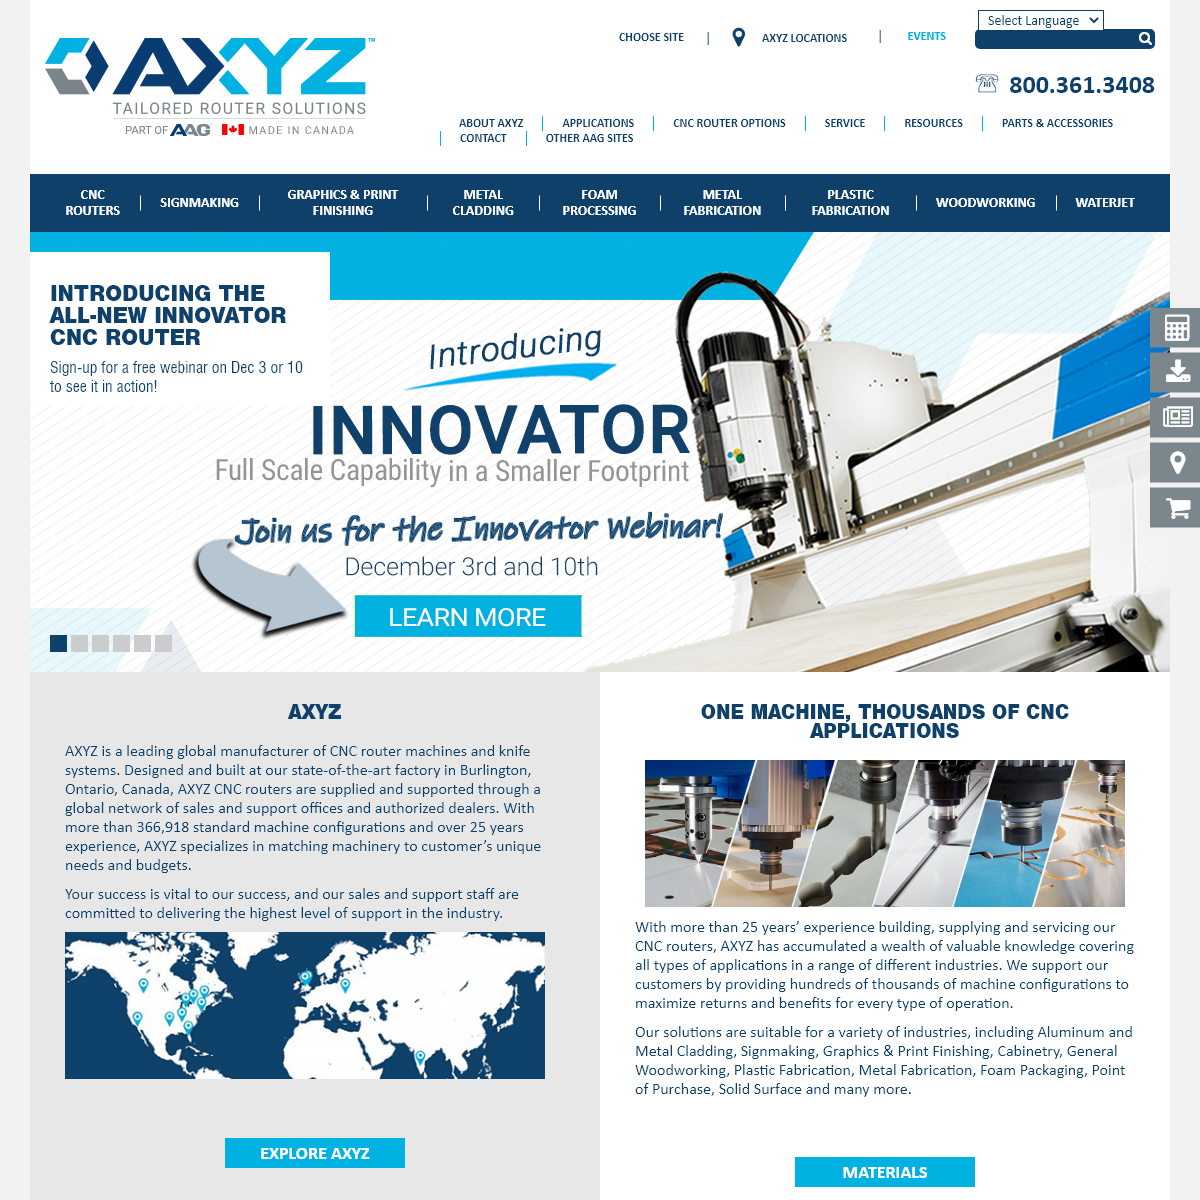 A complete backup of axyz.com